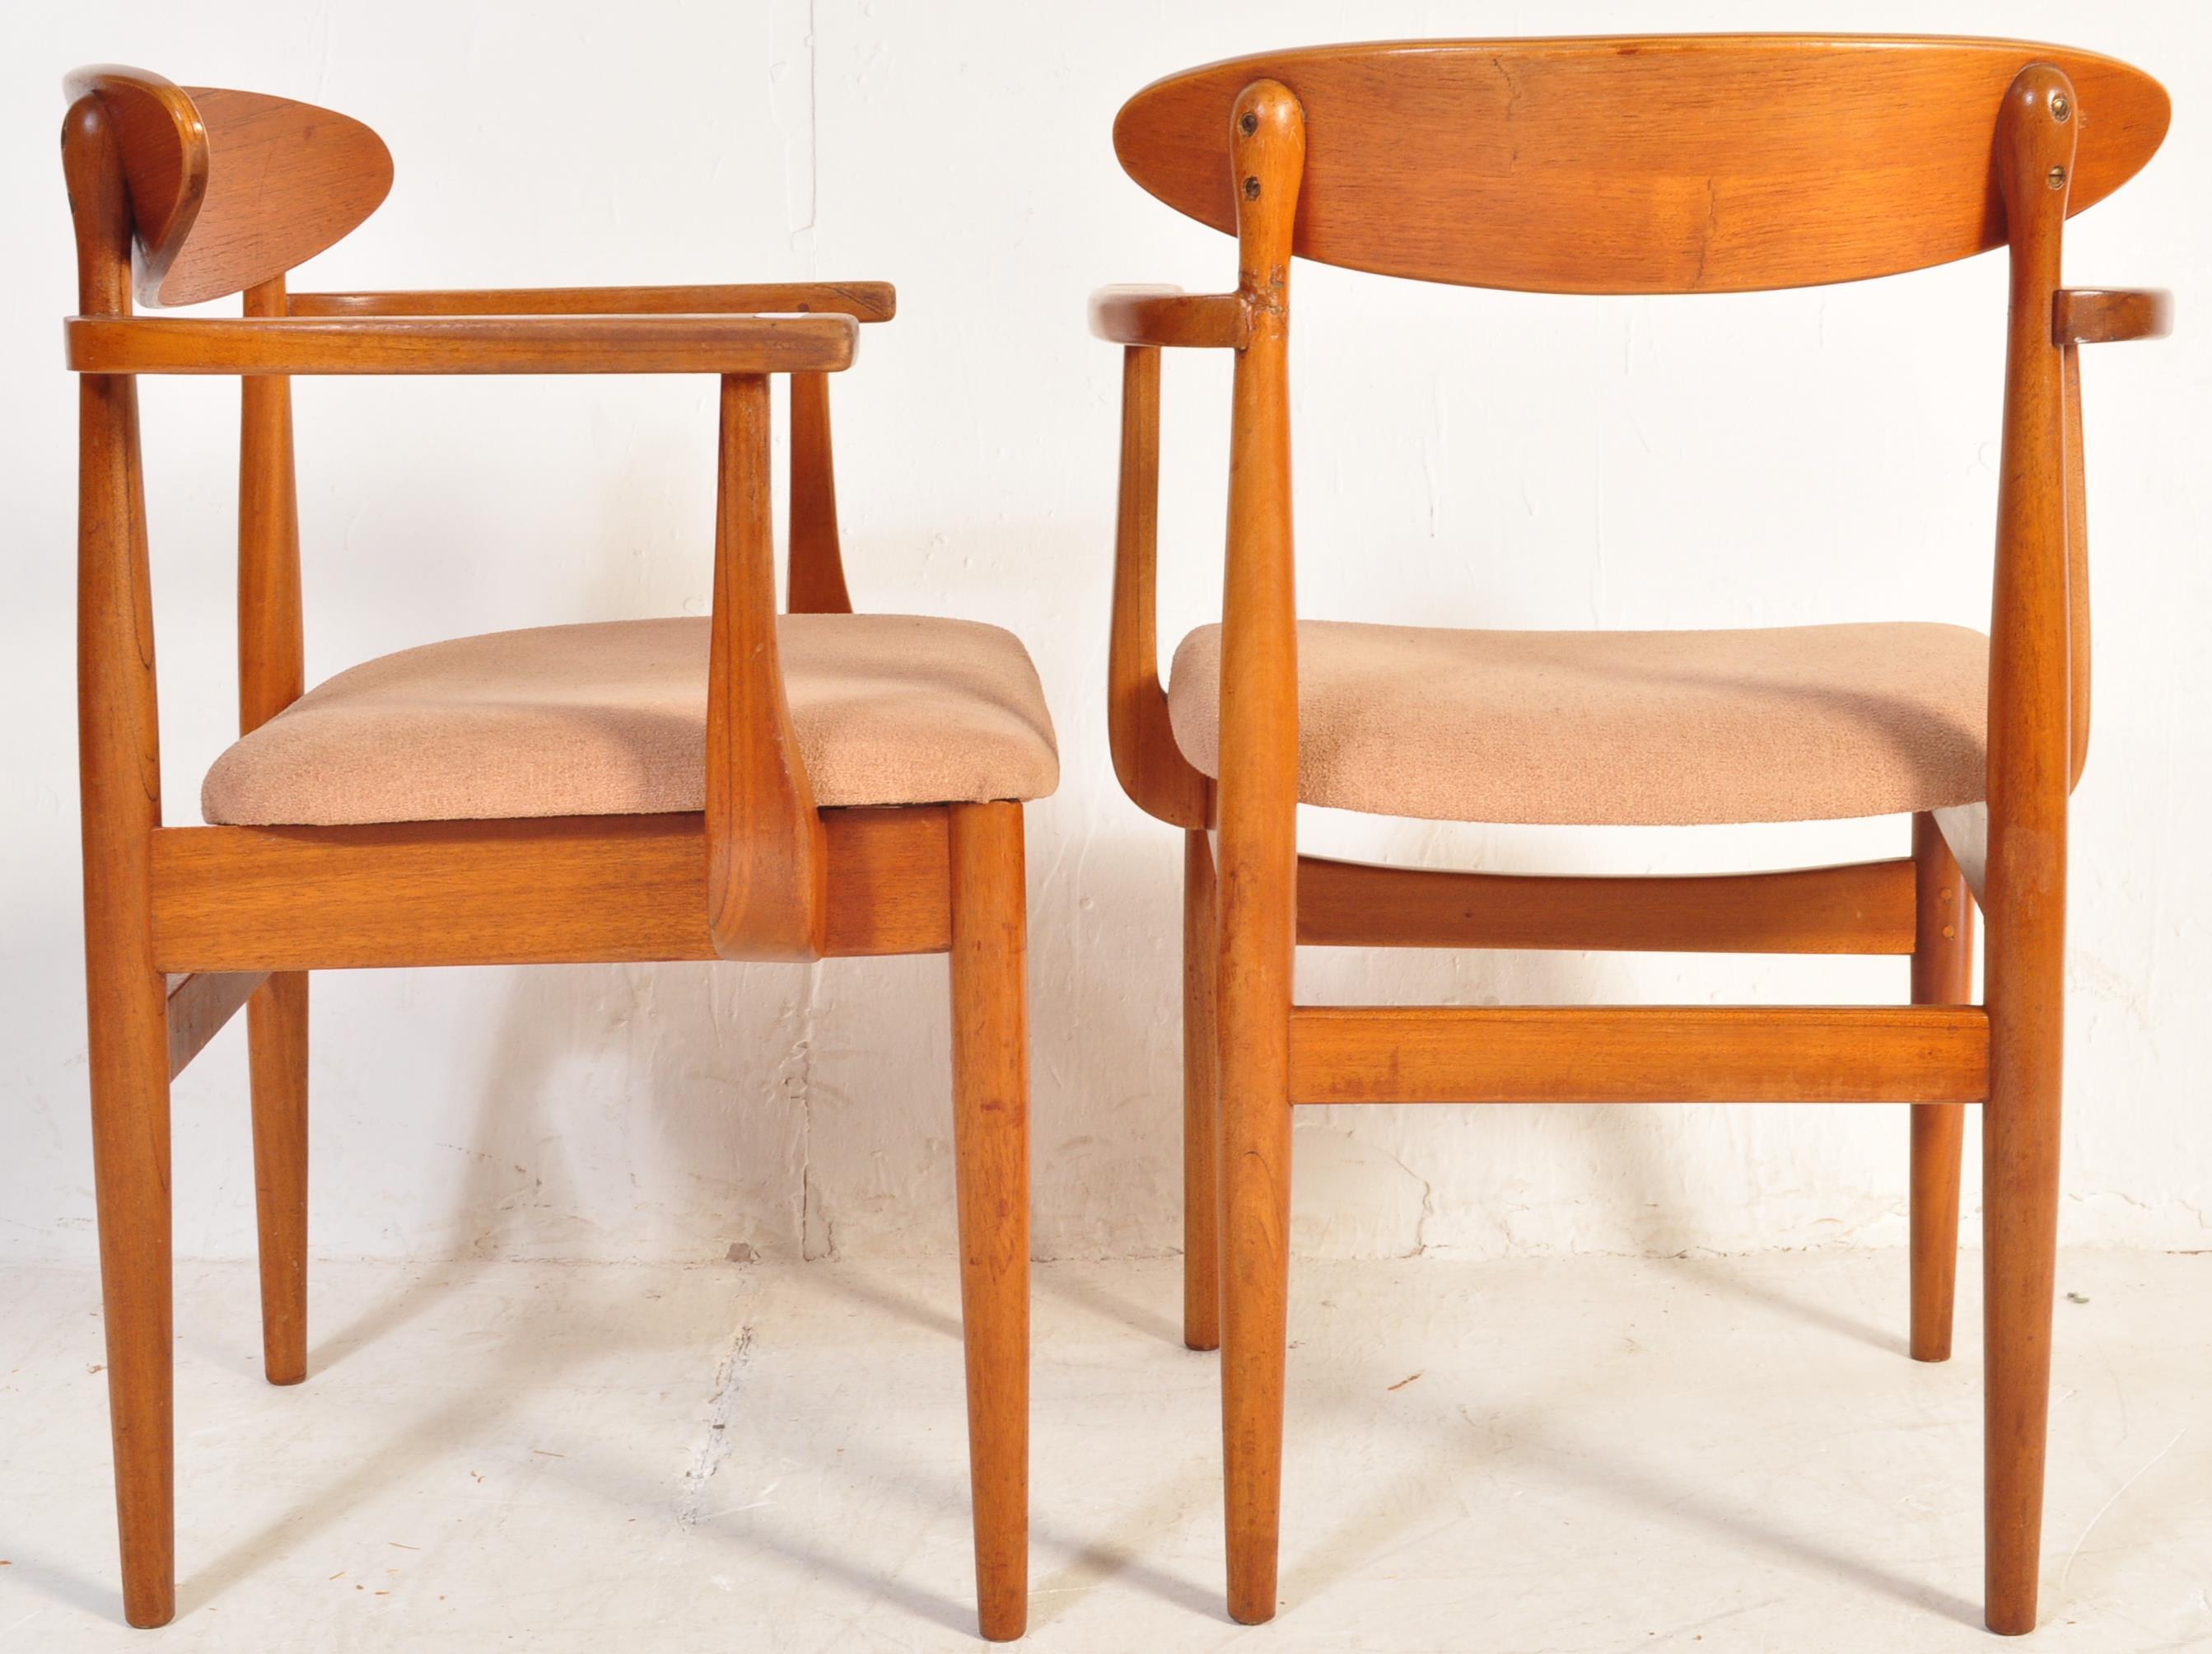 PAIR OF MID 20TH CENTURY DANISH TEAK DINING CHAIRS CARVERS - Image 5 of 5